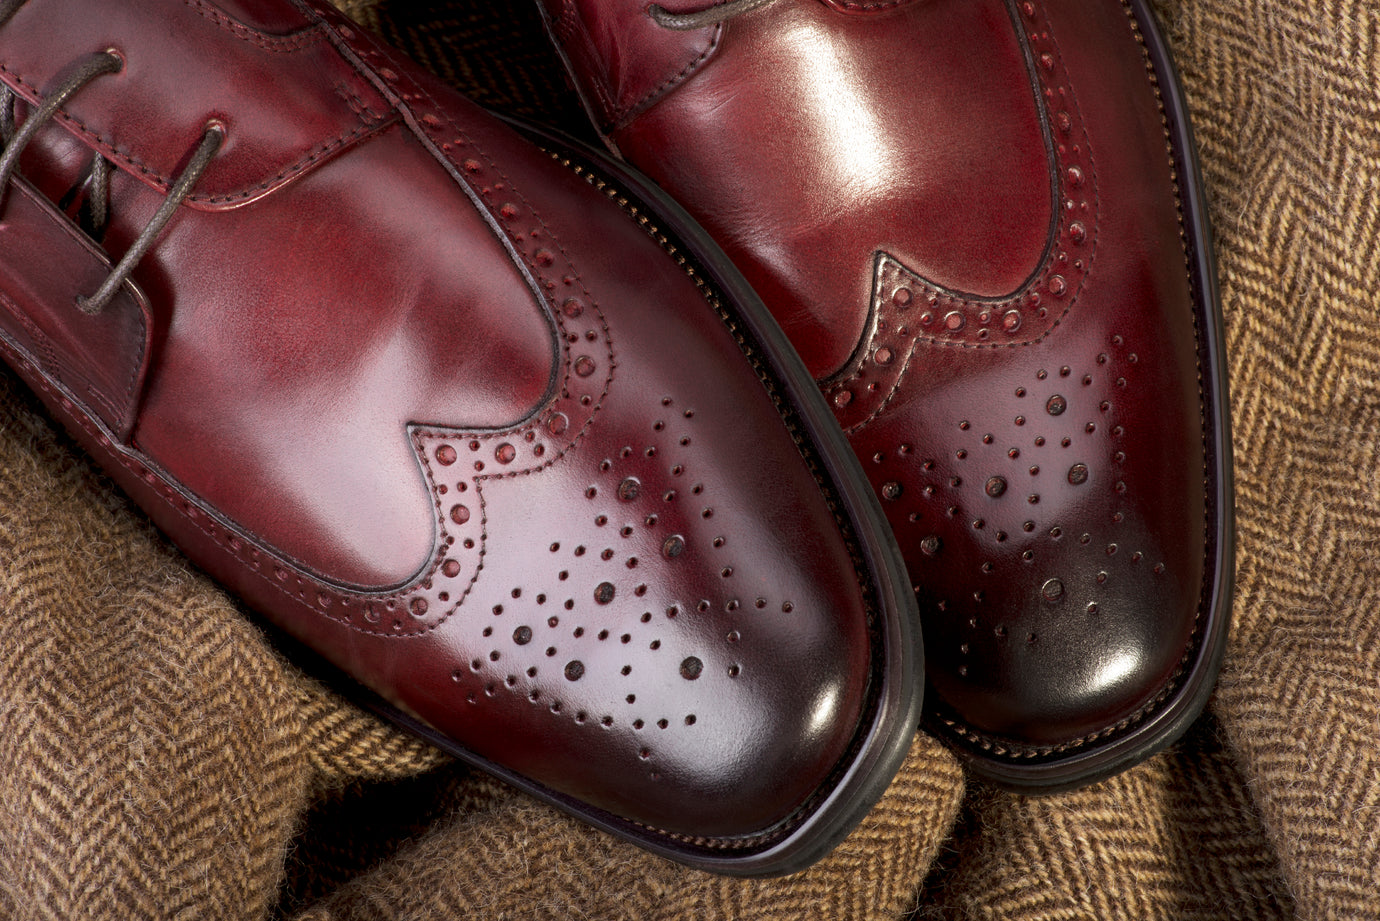 I’ve Invested in a New Pair of Shoes – How Can I Make Sure They Last?